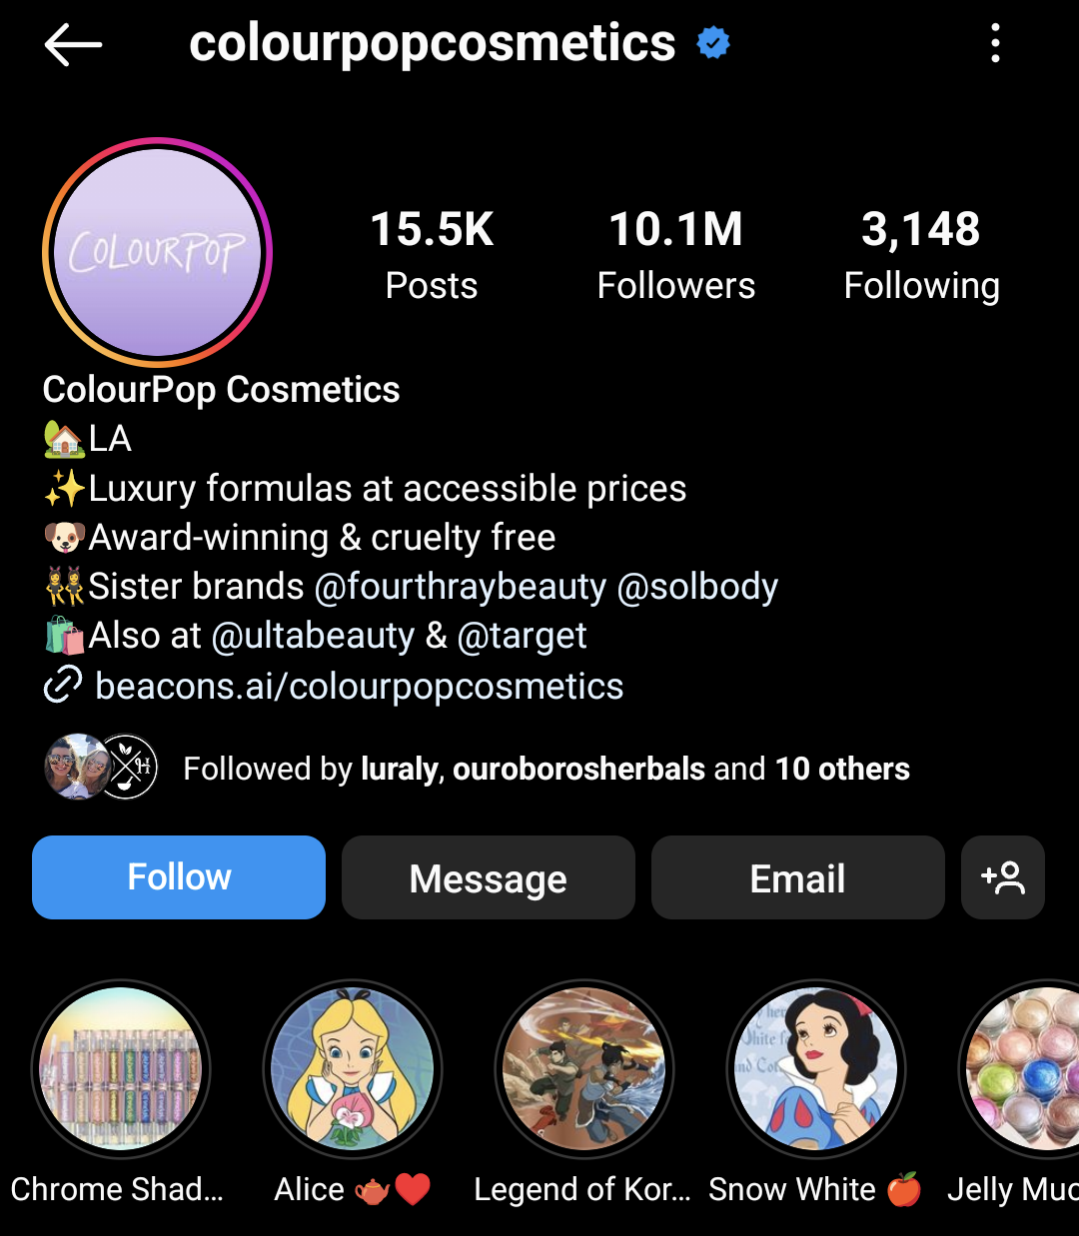 ColourPop's Instagram bio reminds users its products are cruelty-free